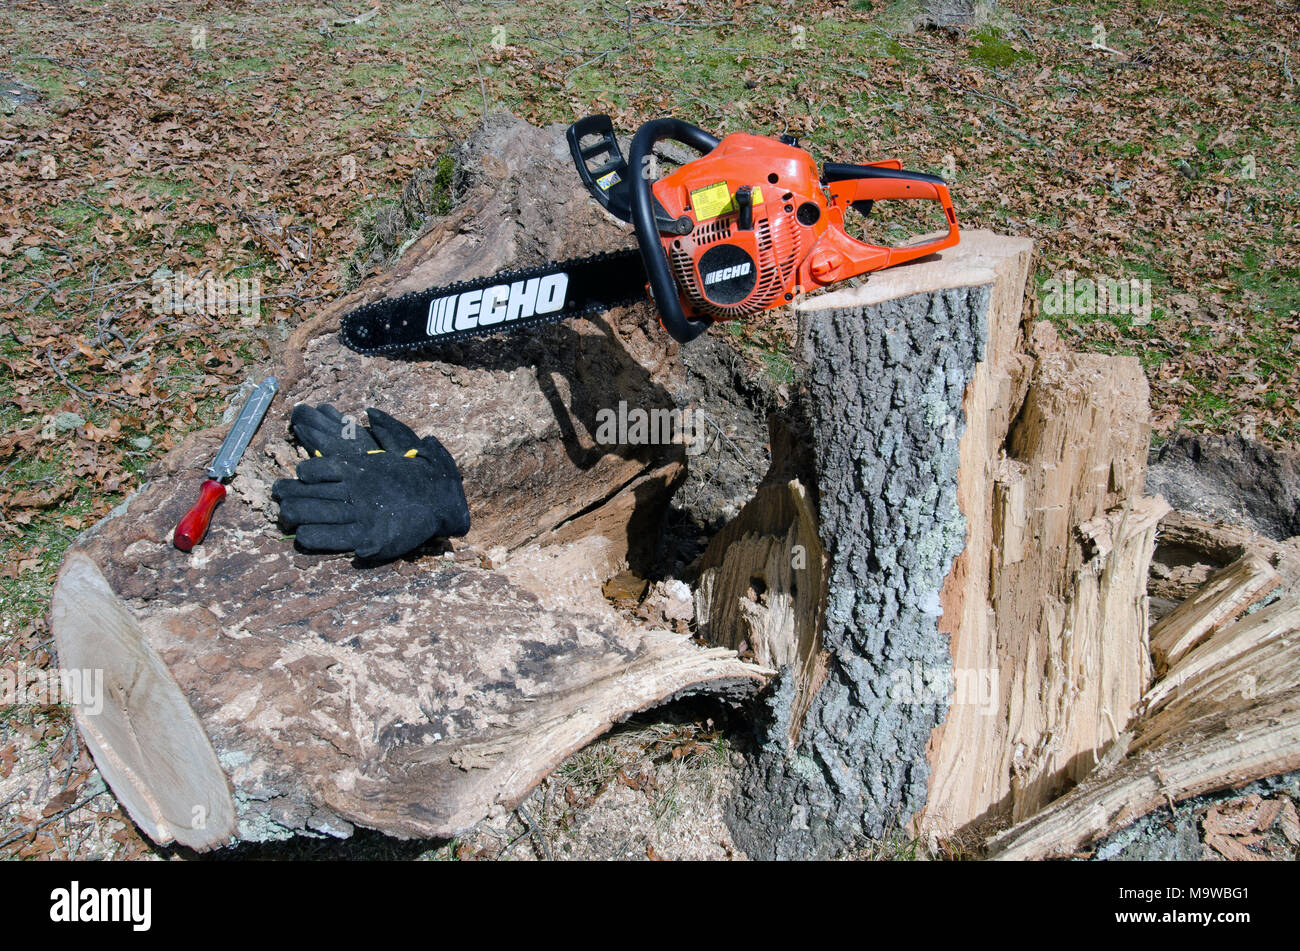 Echo chainsaw on oak tree trunk stump on downed fallen tree being cut for  firewood along with gloves and a blade sharpening file Stock Photo - Alamy